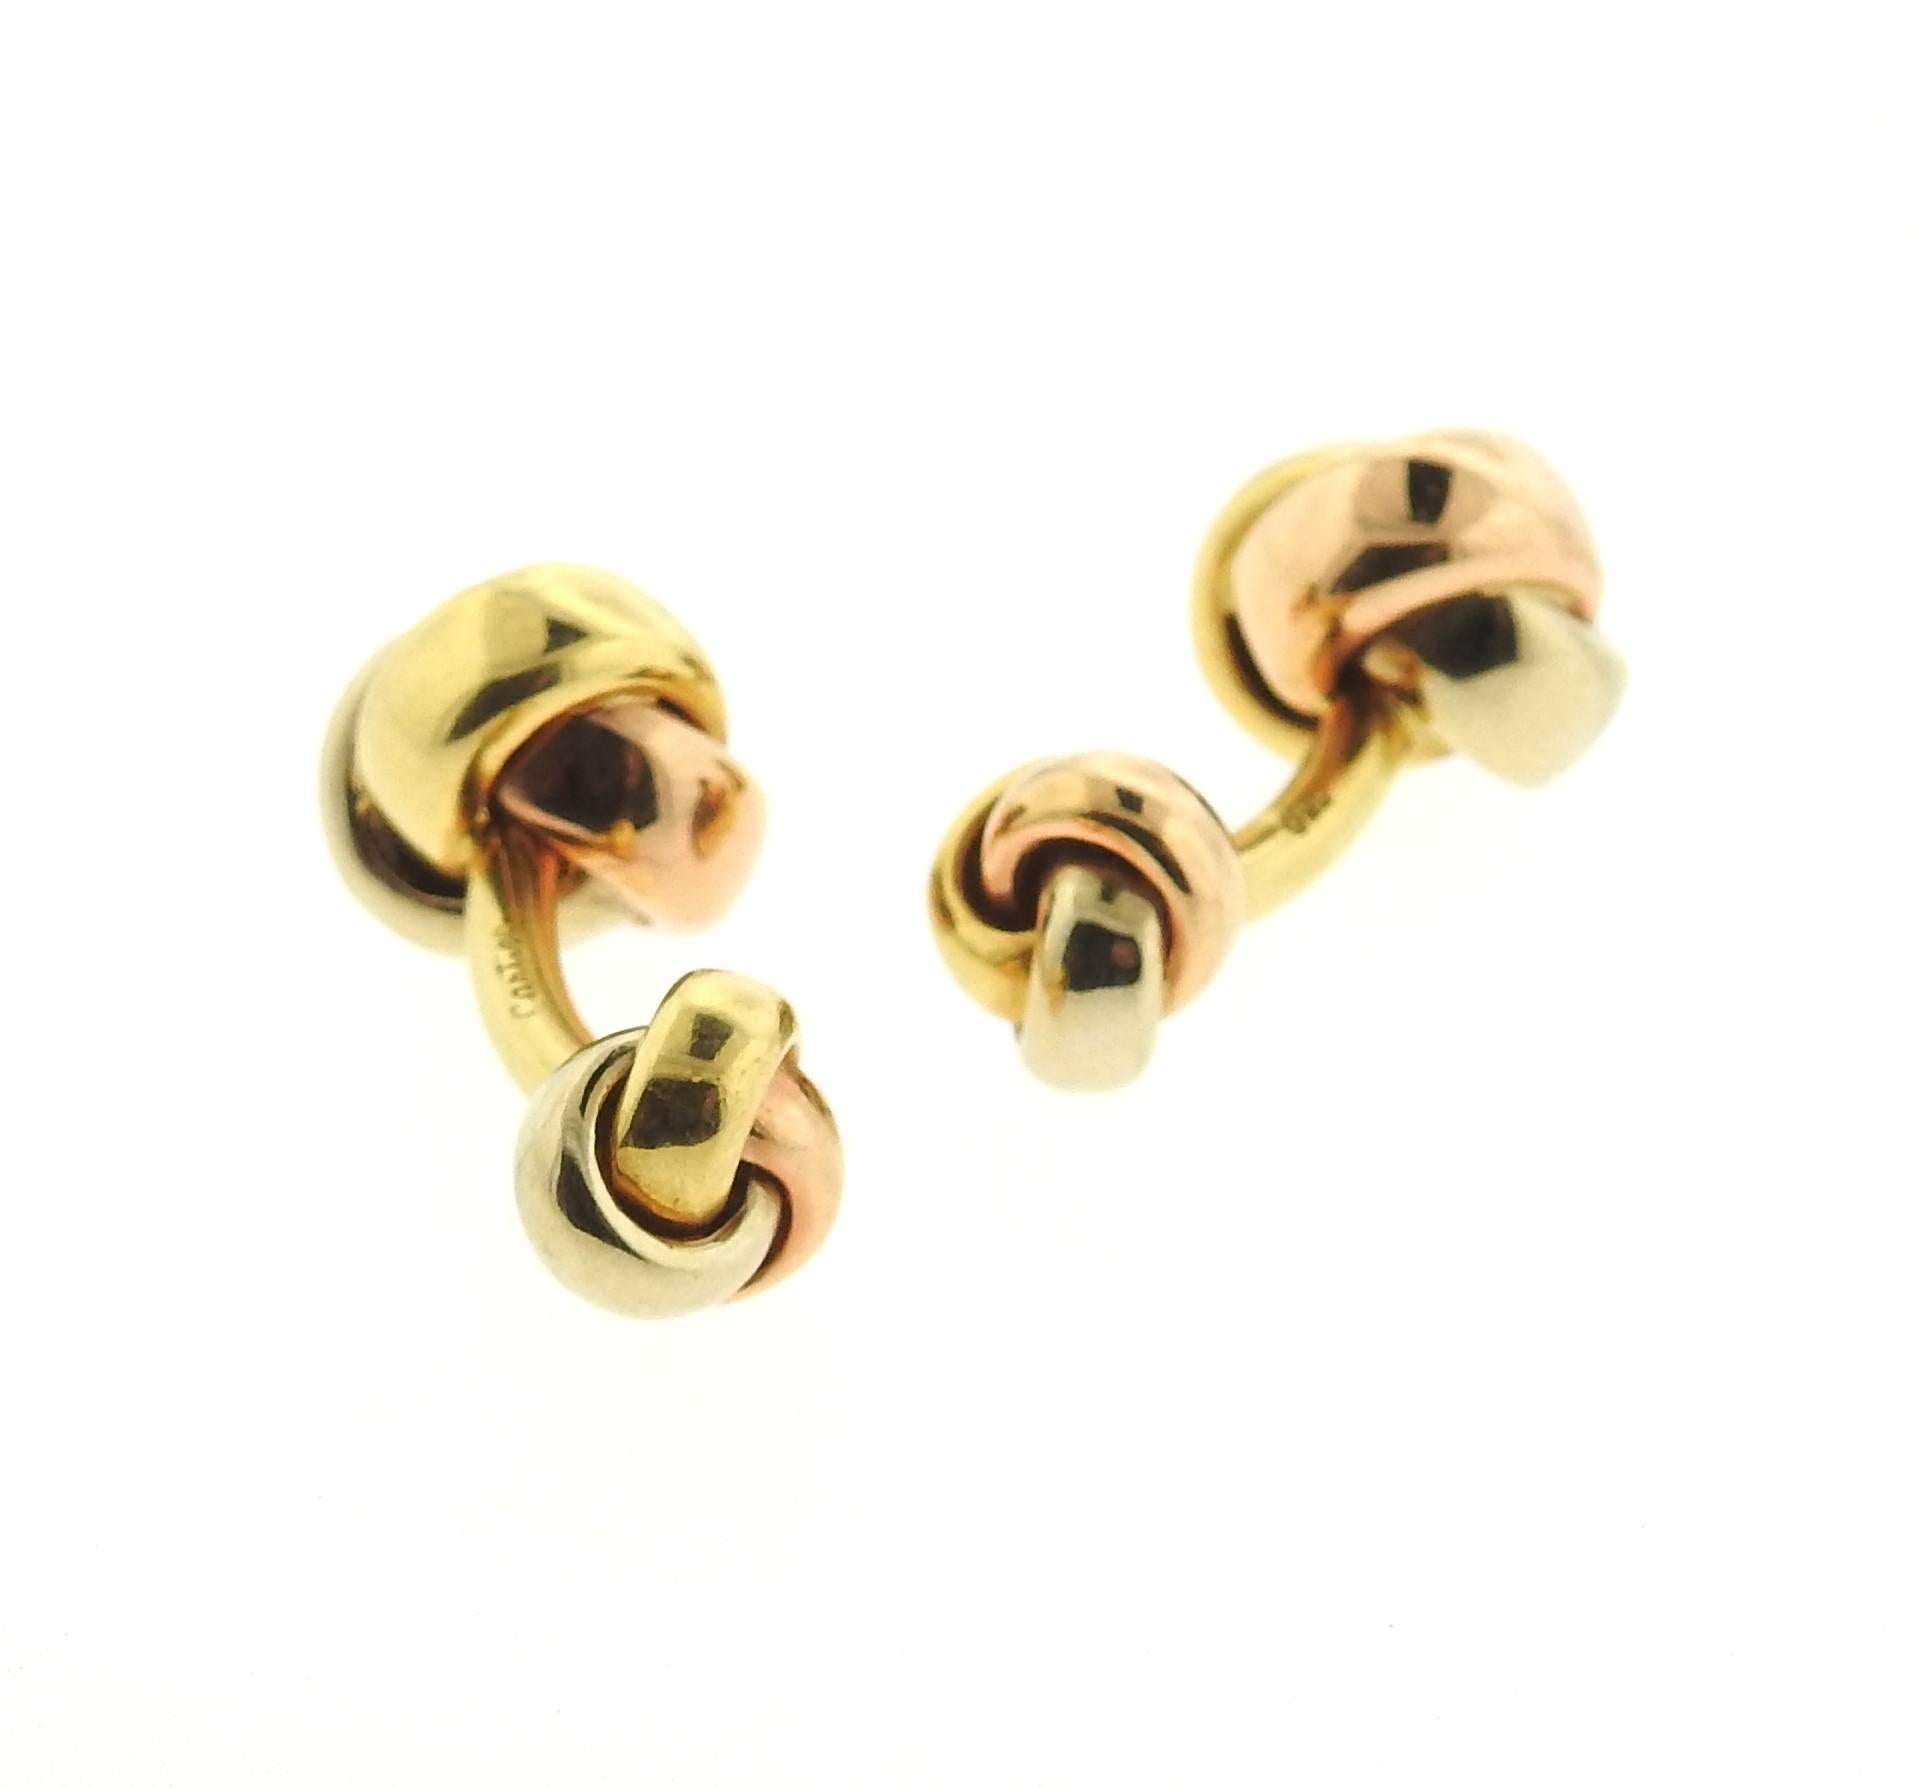 Pair of 18k tri color gold knot cufflinks, crafted by Cartier for Trinity collection. Cufflink top measures 14mm x 14mm, back - 10mm x 10mm. Marked: Cartier, 750. Weight - 22.1 grams